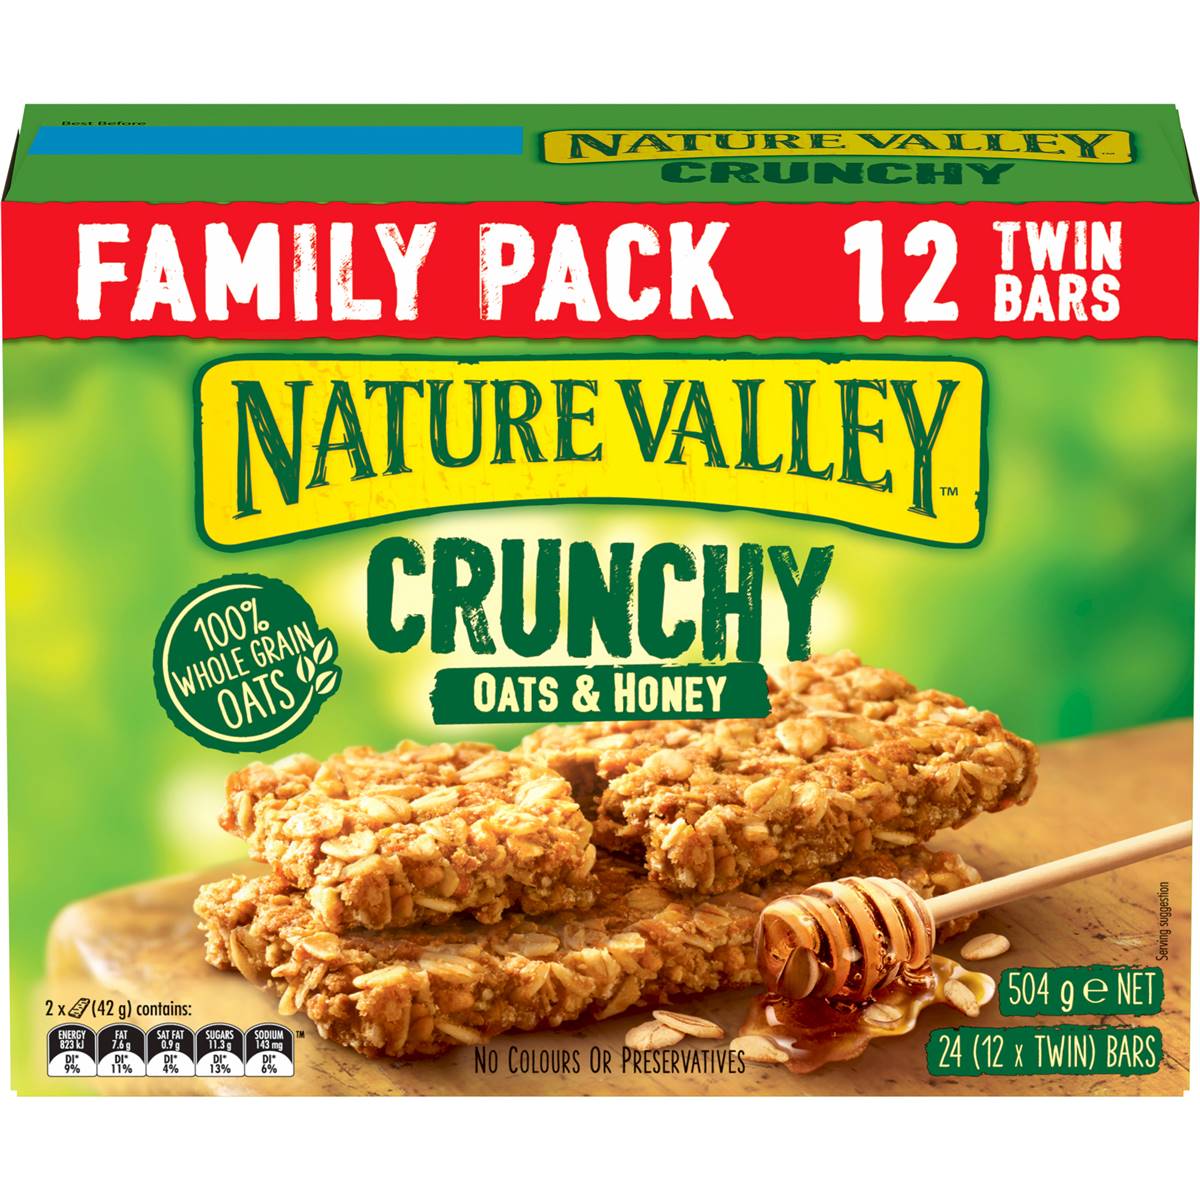 Calories in Nature Valley Crunchy Oats & Honey Granola Bars